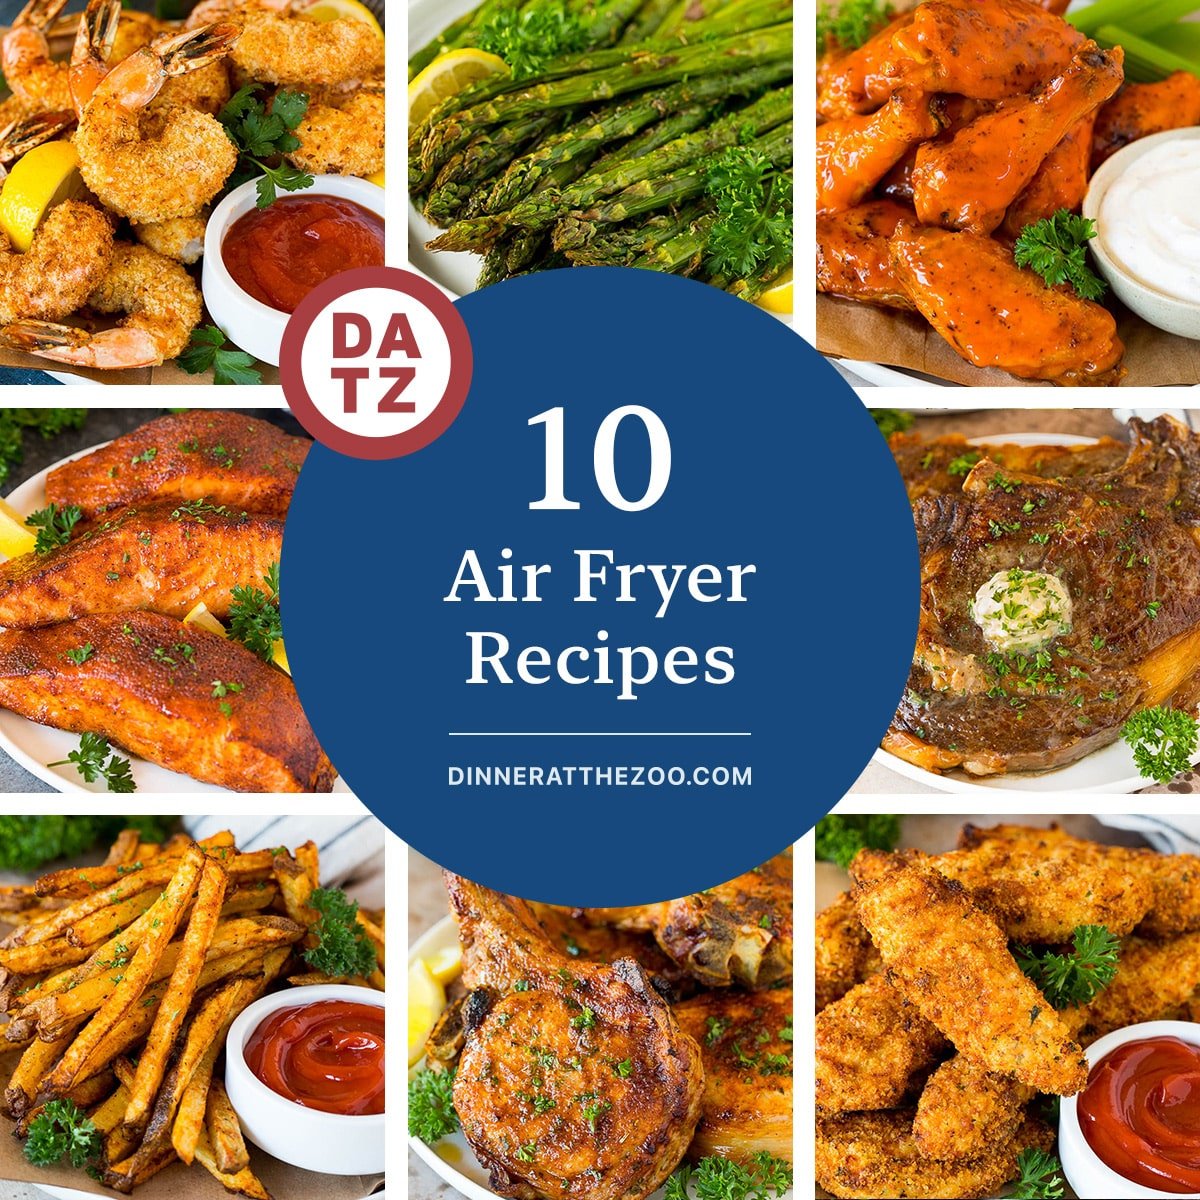 A collection of amazing air fryer recipes for any occasion including chicken wings, shrimp and pork chops.